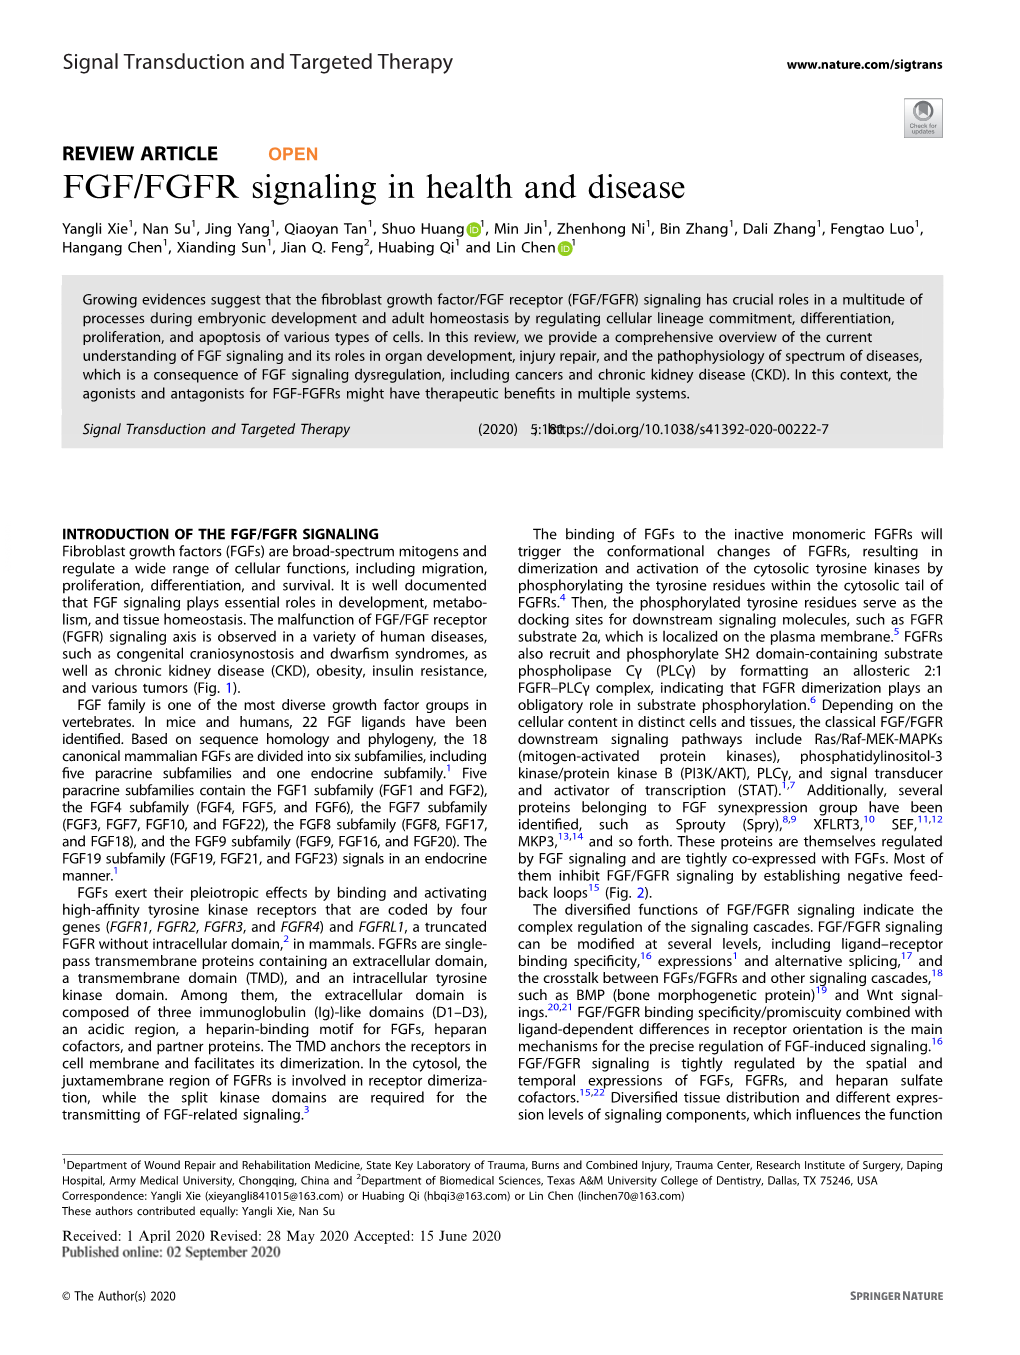 FGF/FGFR Signaling in Health and Disease